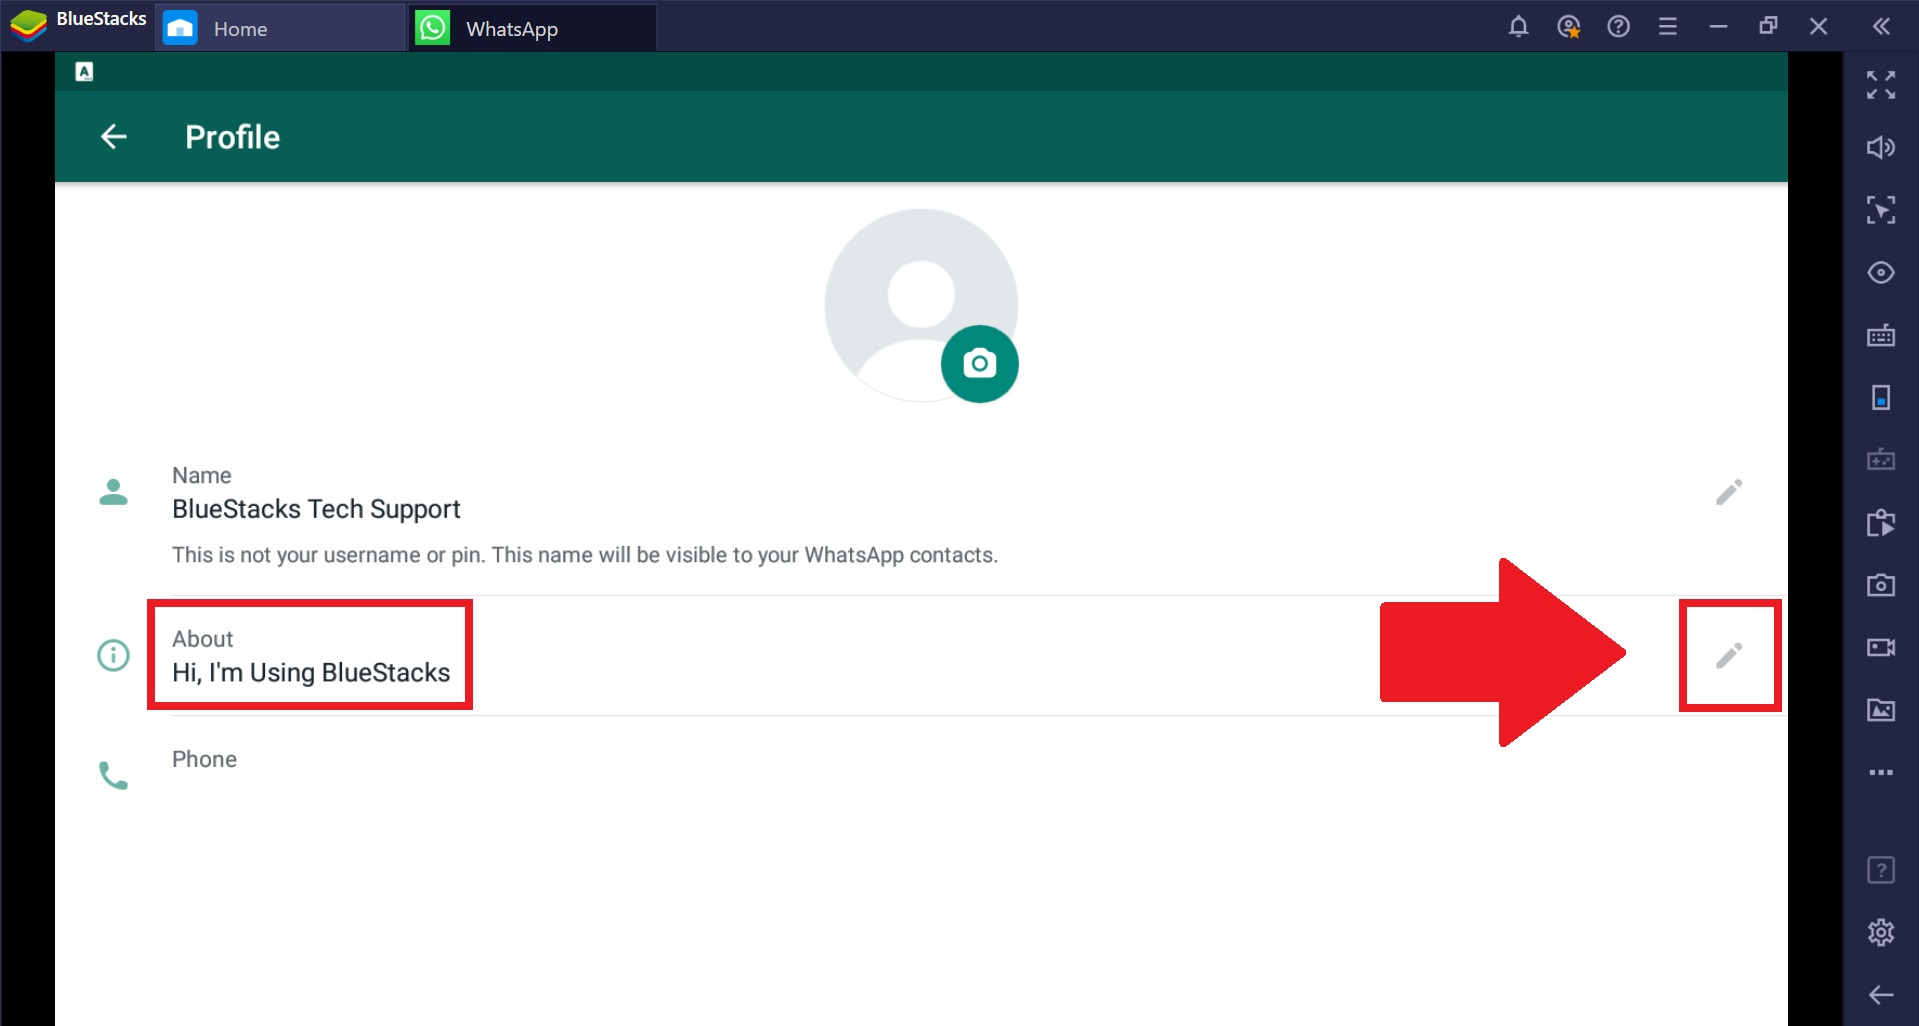 How To Upload Images And Change Status On Whatsapp In Bluestacks 4 Bluestacks Support